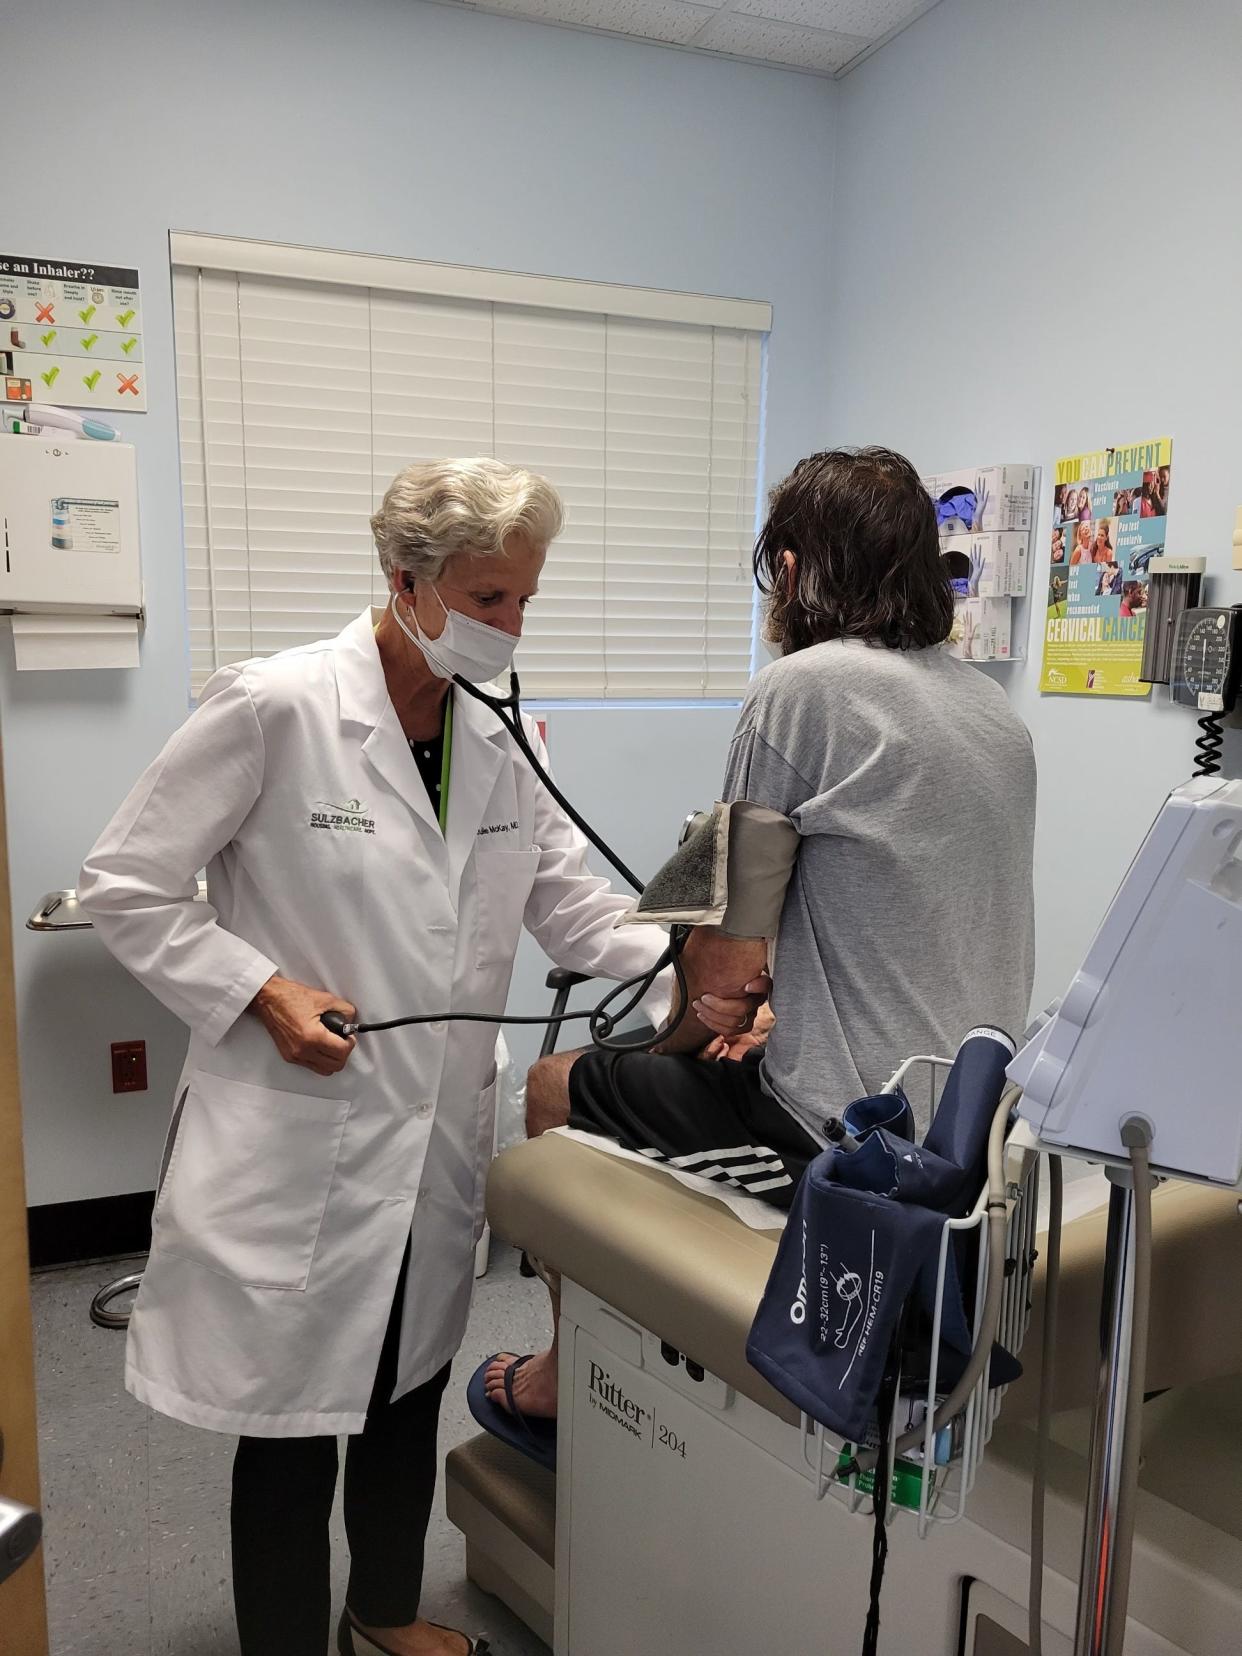 Dr. Julia McKay treats a patient at the Sulzbacher Center clinic, where she is the lead physician and works to meet the health needs of the unhoused in Jacksonville.